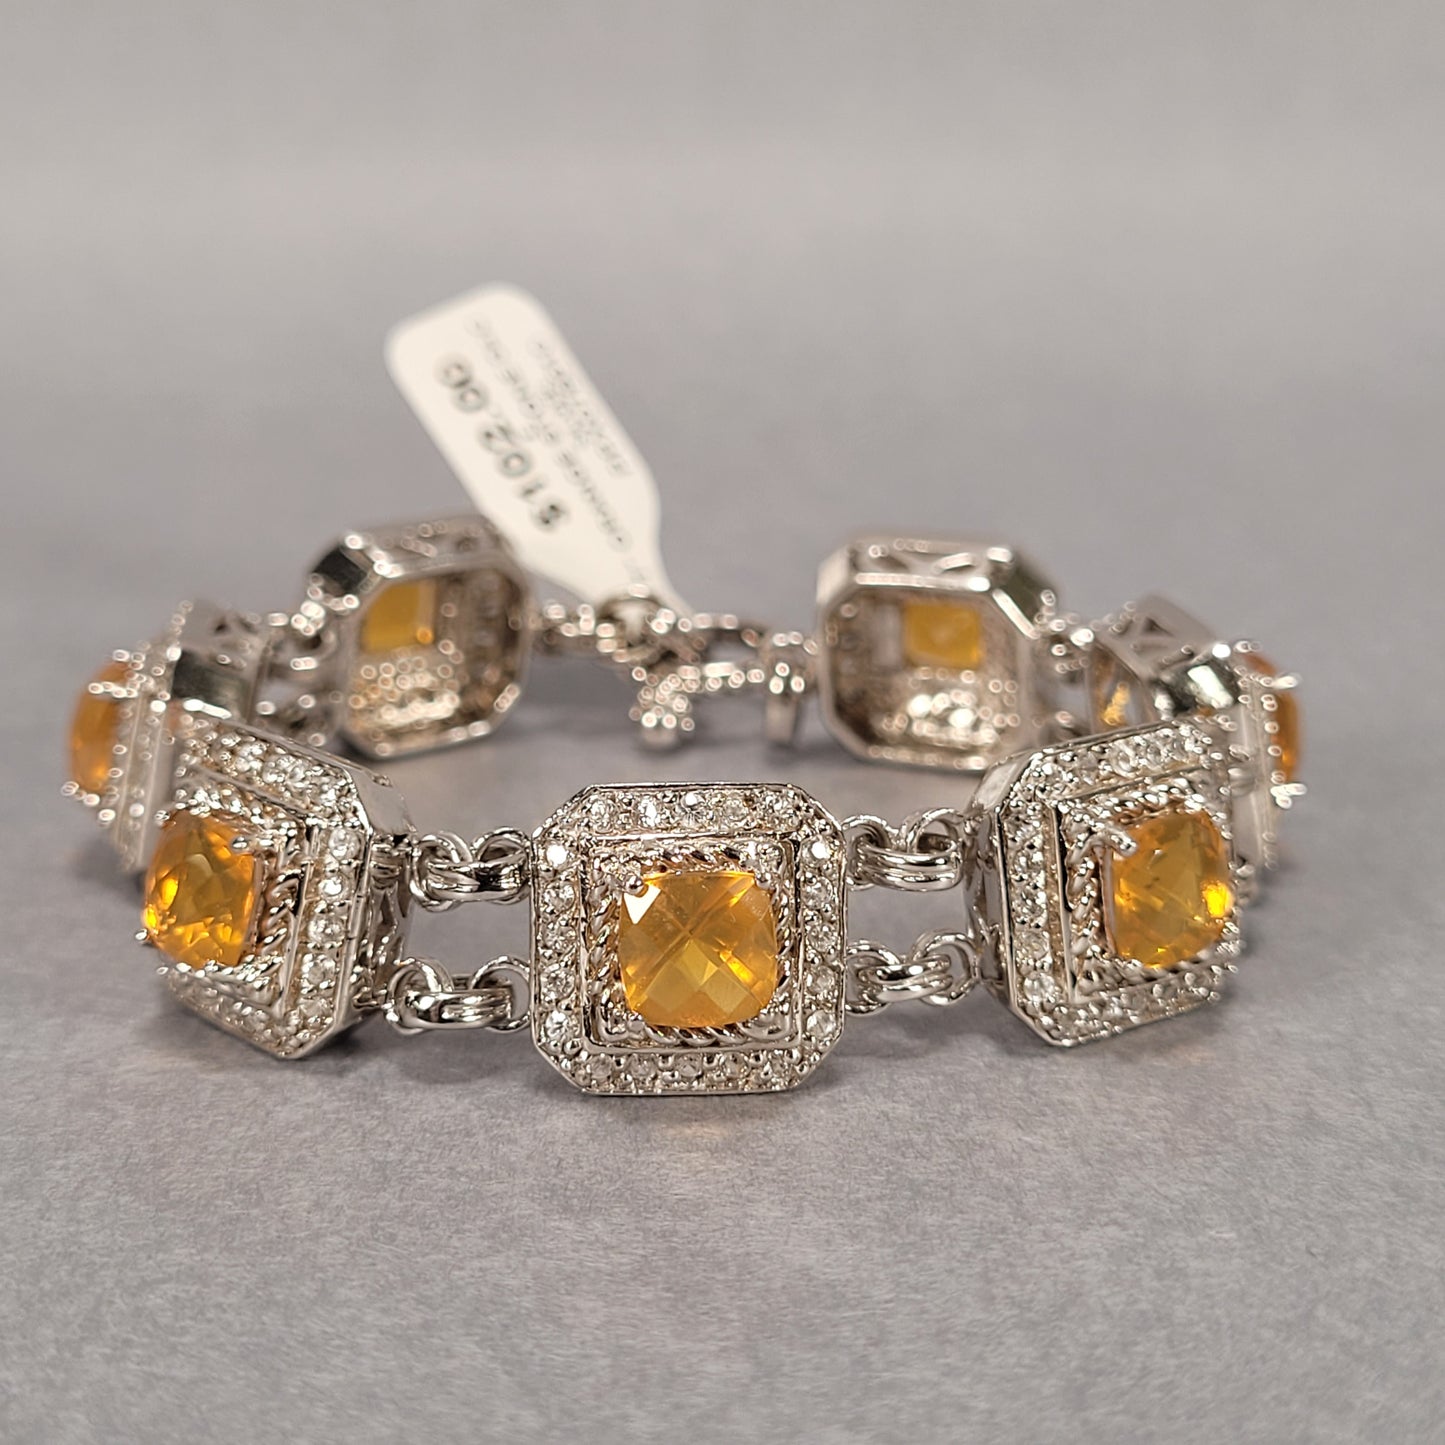 7" Sterling Silver Bracelet With Orange and Clear Stones 34g